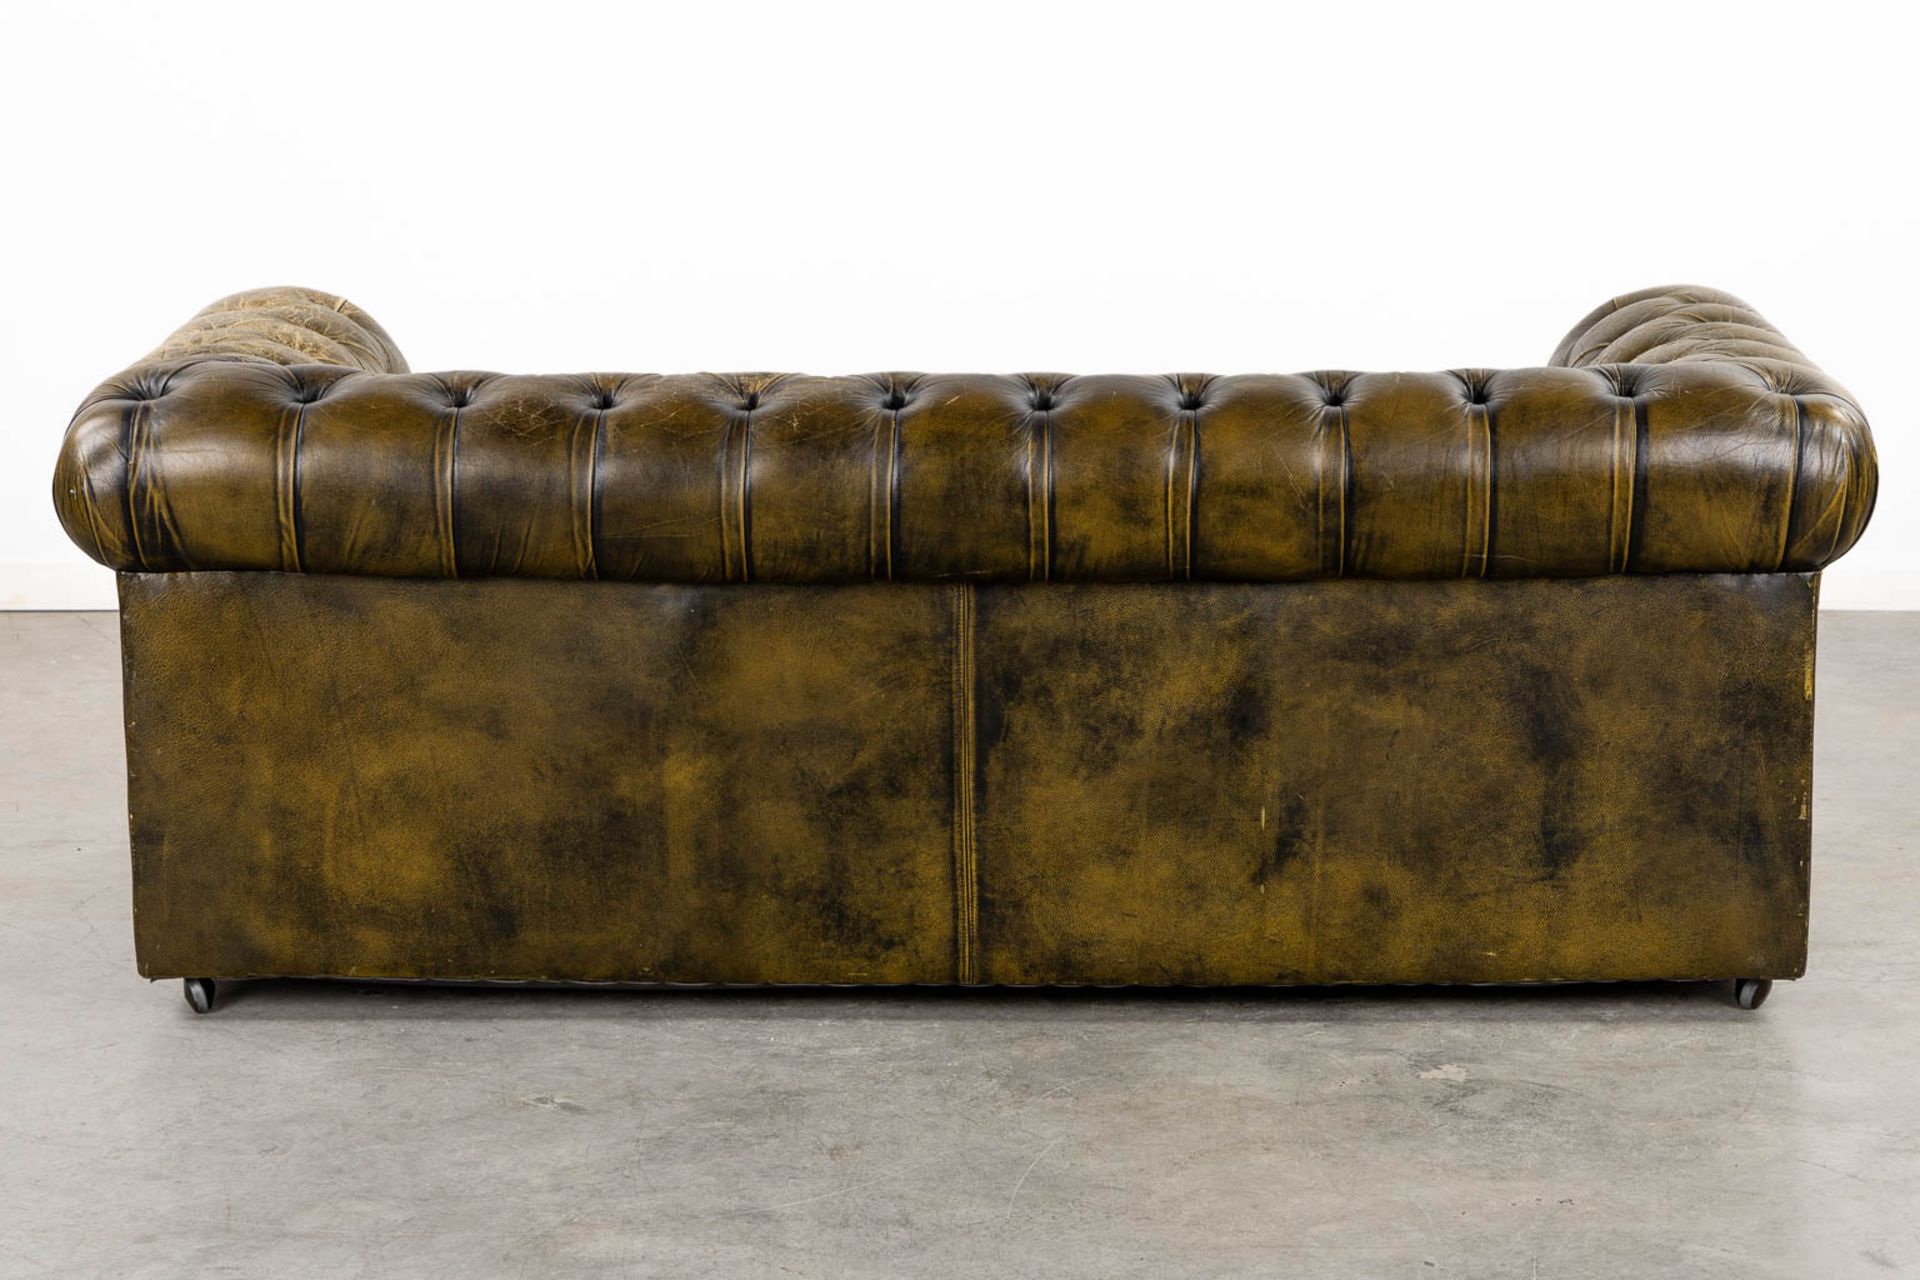 A Chesterfield three-person, green leather sofa. (L:90 x W:188 x H:68 cm) - Image 5 of 13